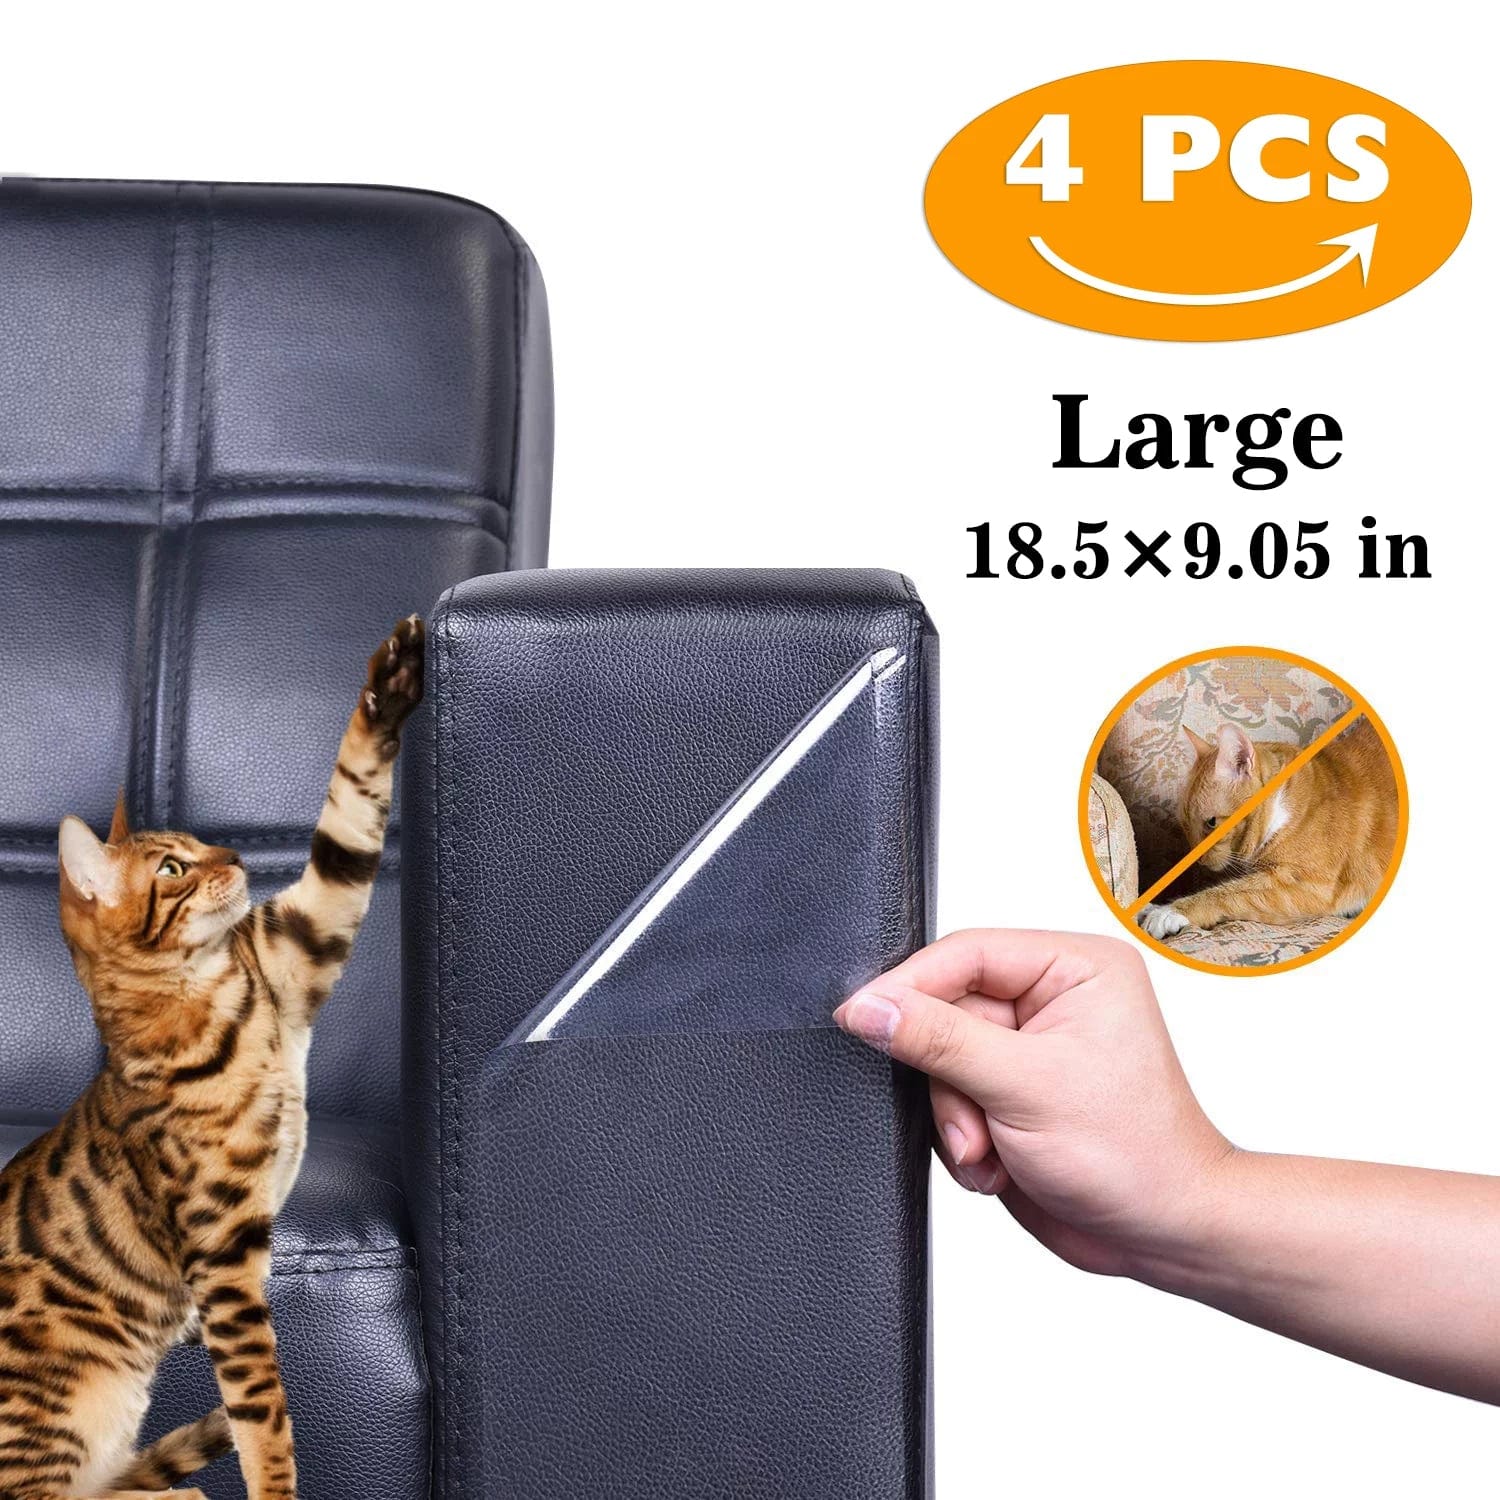 4PCS Large (18.5 X9.05Inch) Furniture Protectors from Cats, Stop Cat Scratching Couch, Door & Other Furniture and Car Seat, Self-Adhesive Flexible Vinyl Sheet,Pet Scratch Deterrent for Furniture